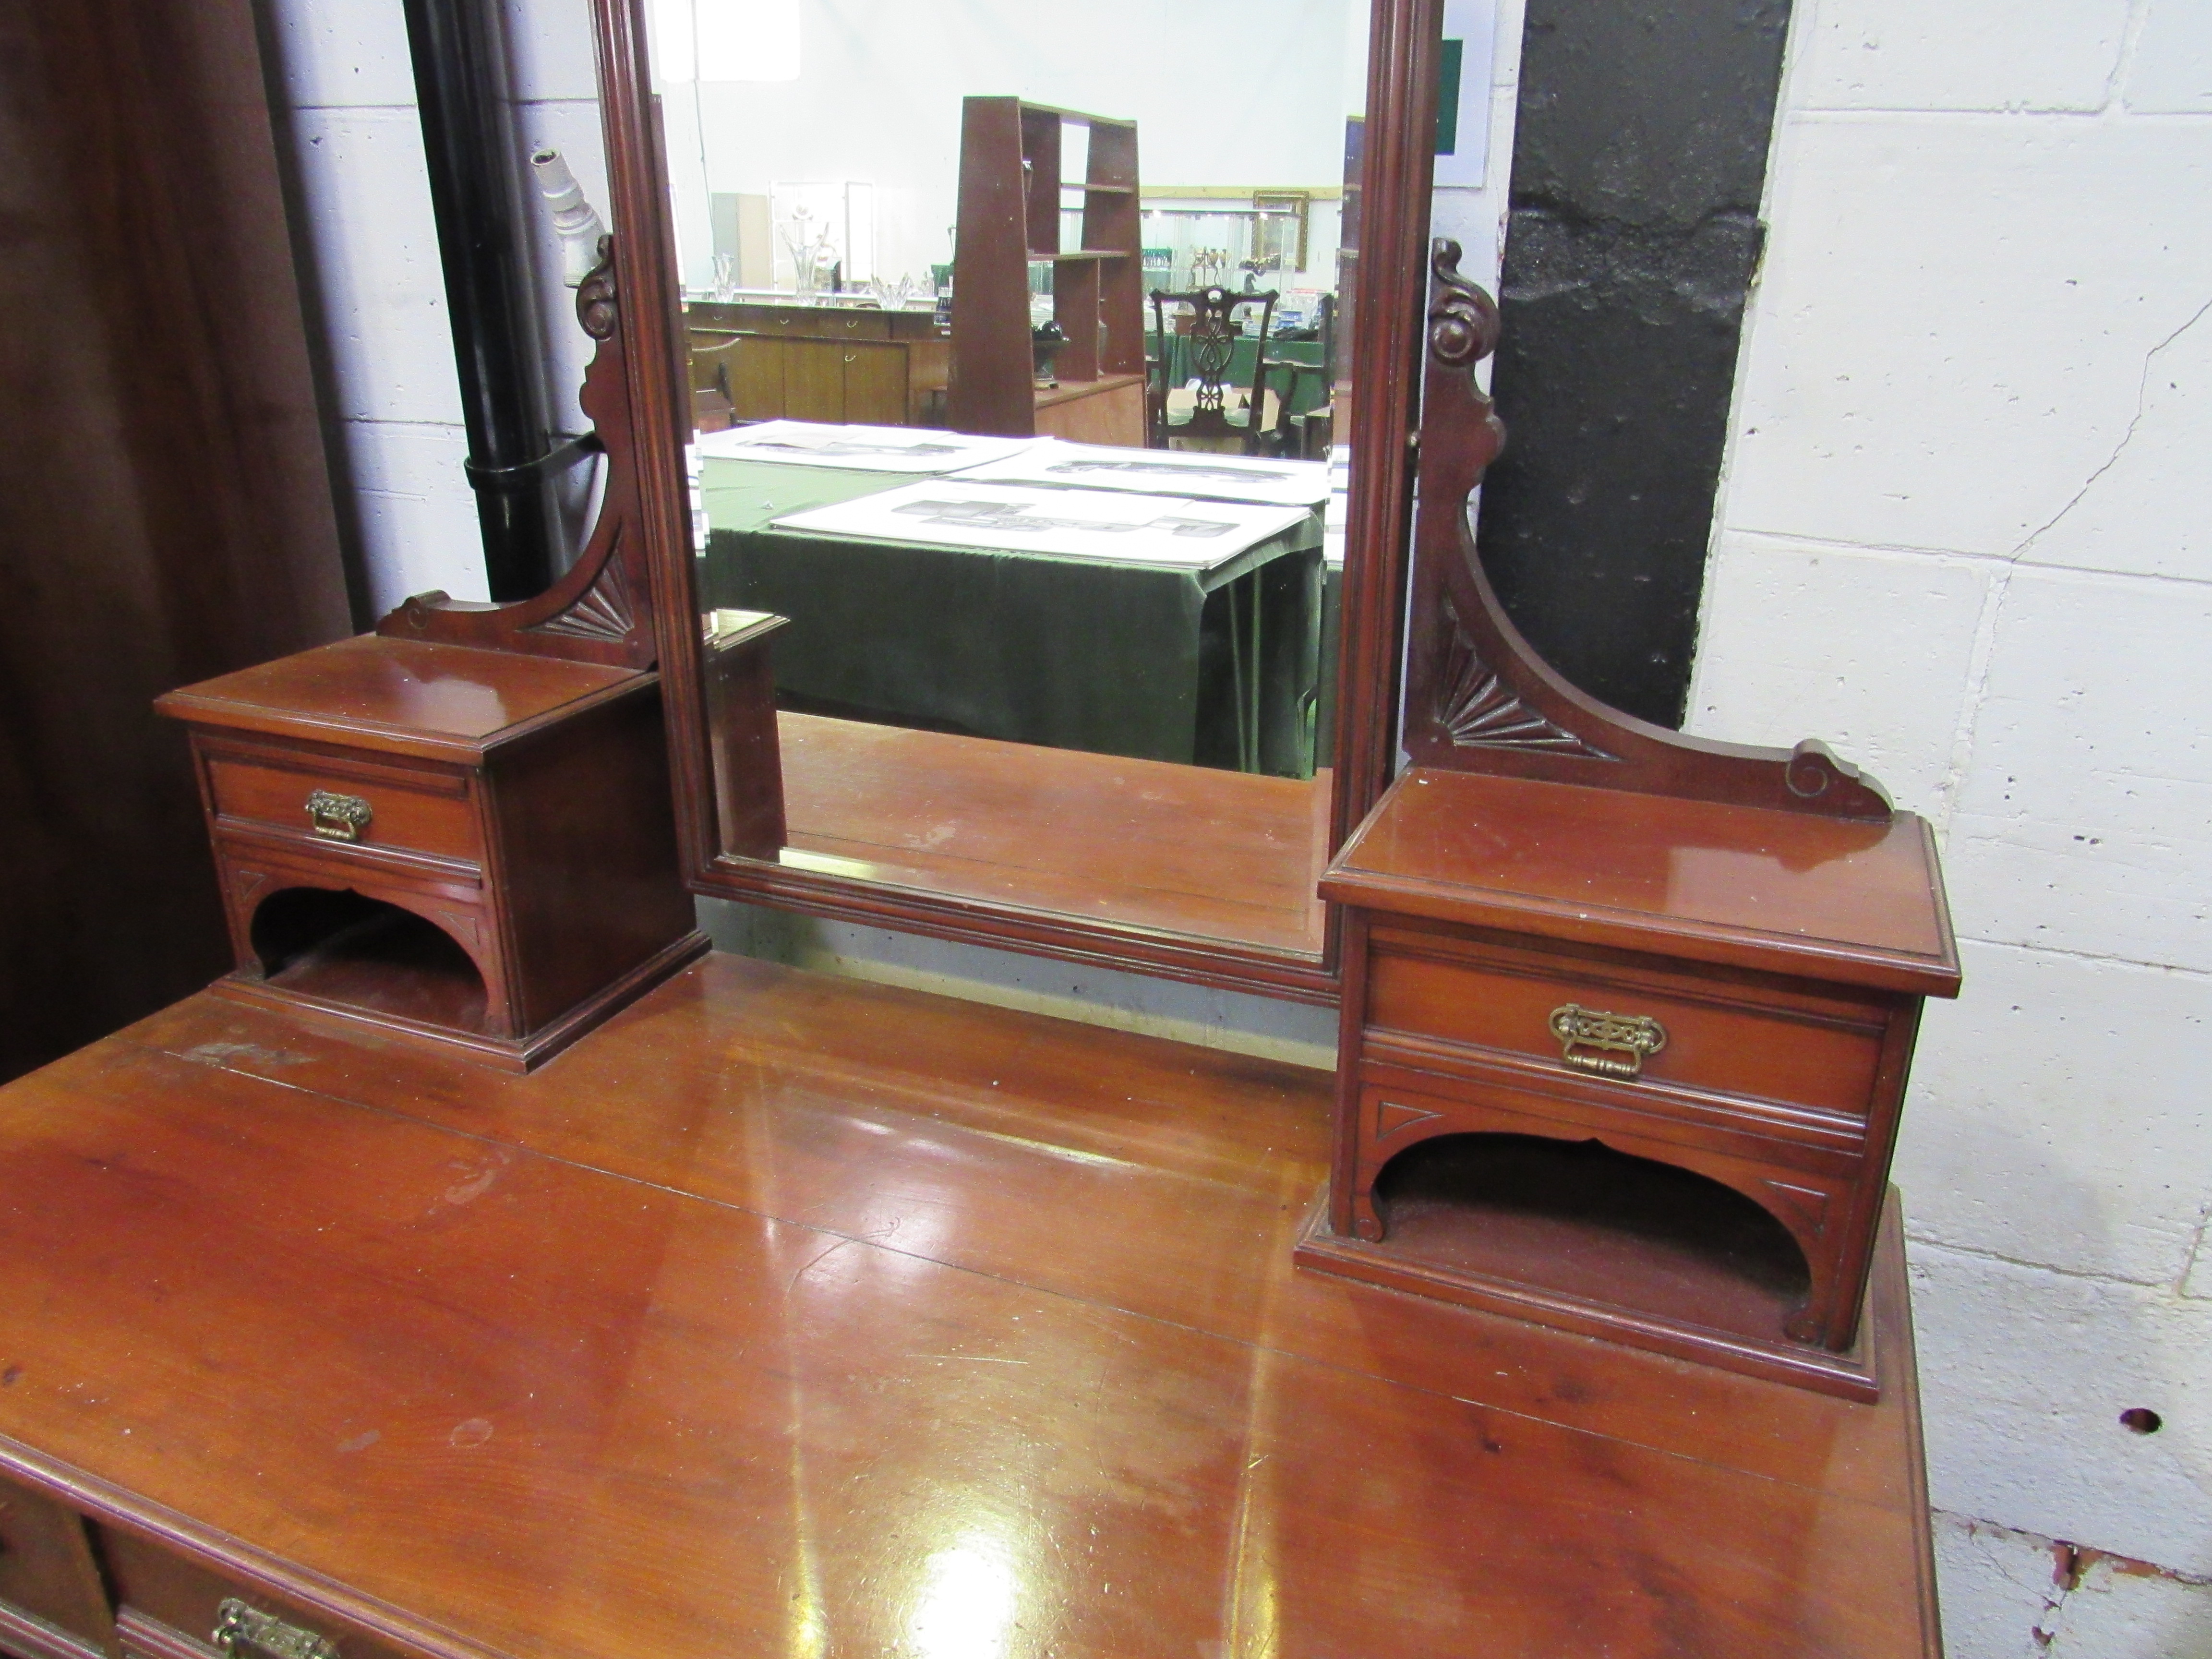 Mahogany dressing table with three frieze drawers, mirror flanked by two small cabinets, turned legs - Image 3 of 3